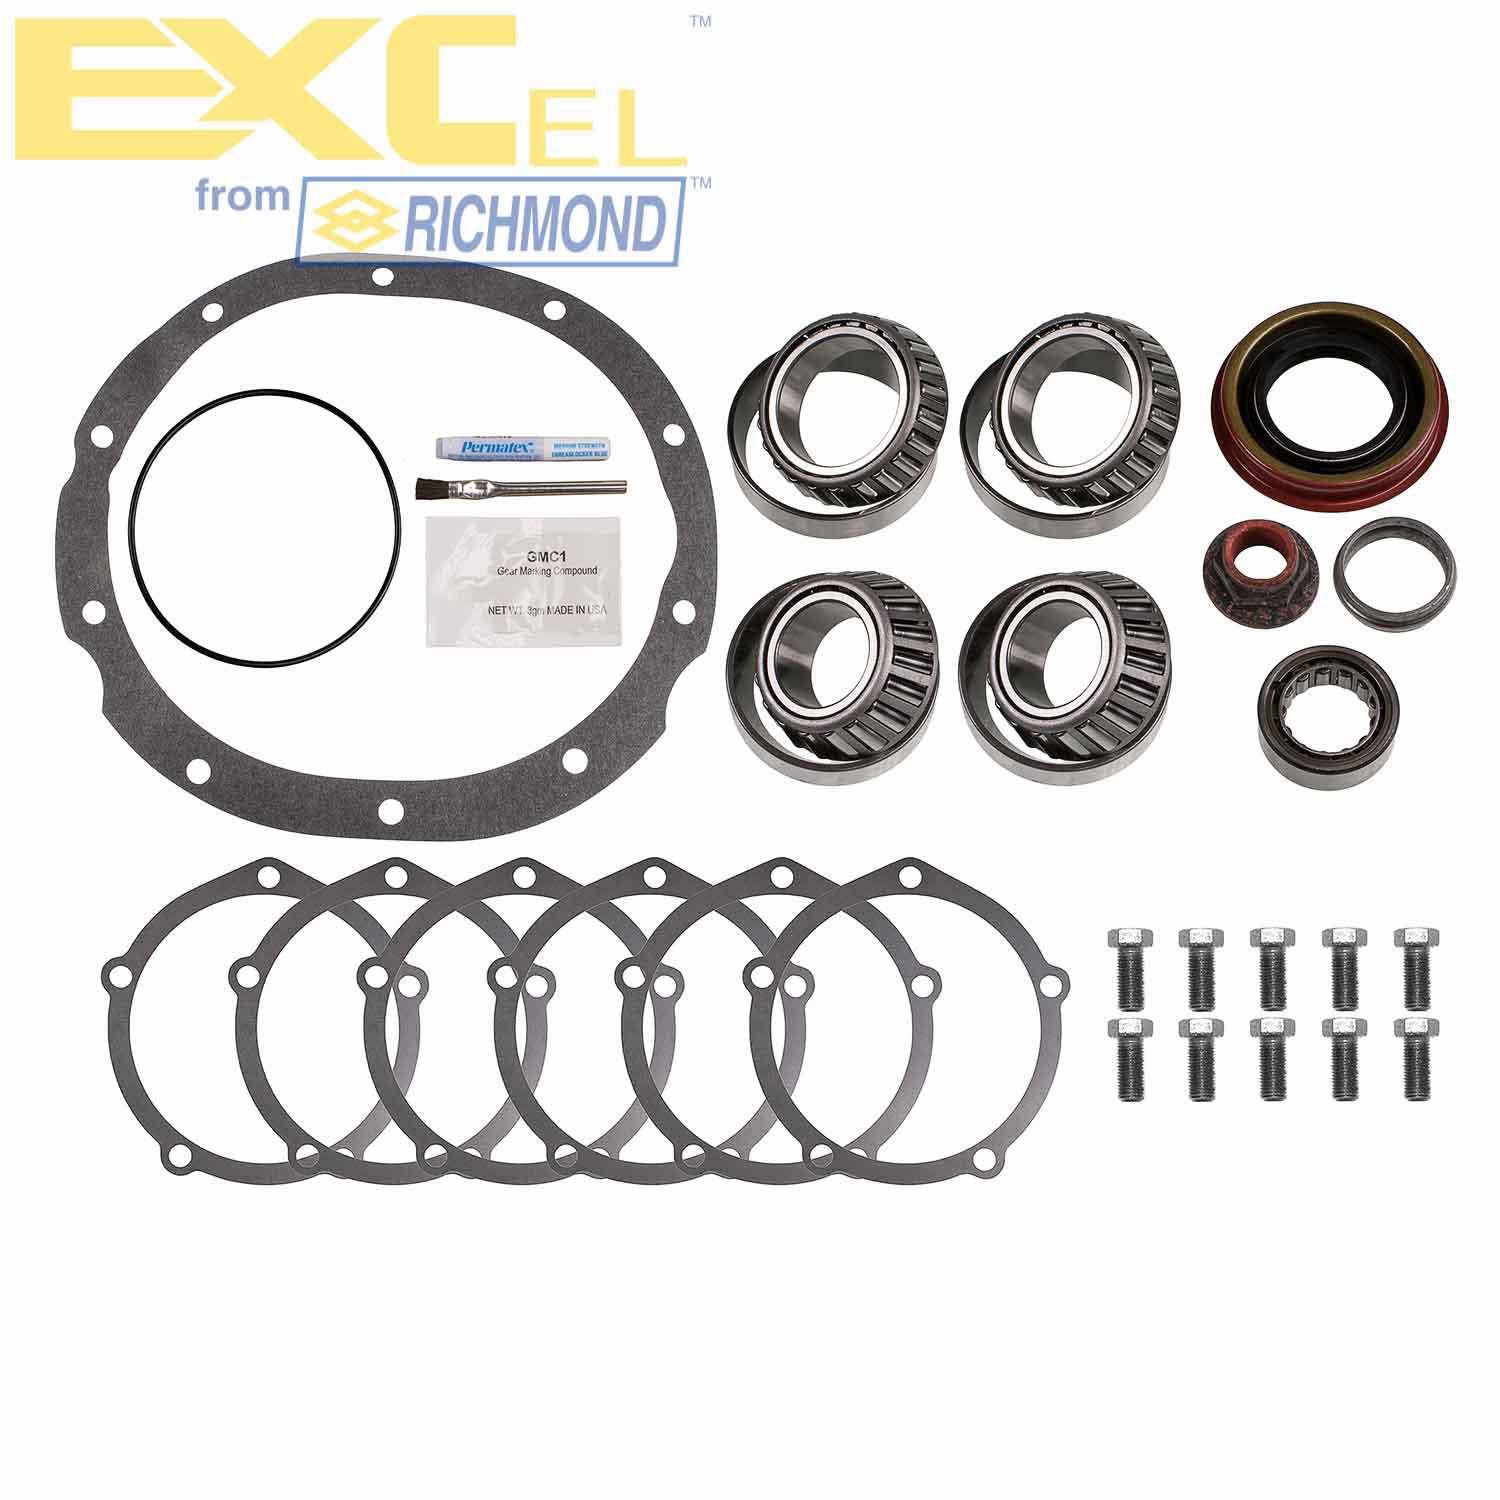 Excel XL-1011-1 Differential Bearing Kit